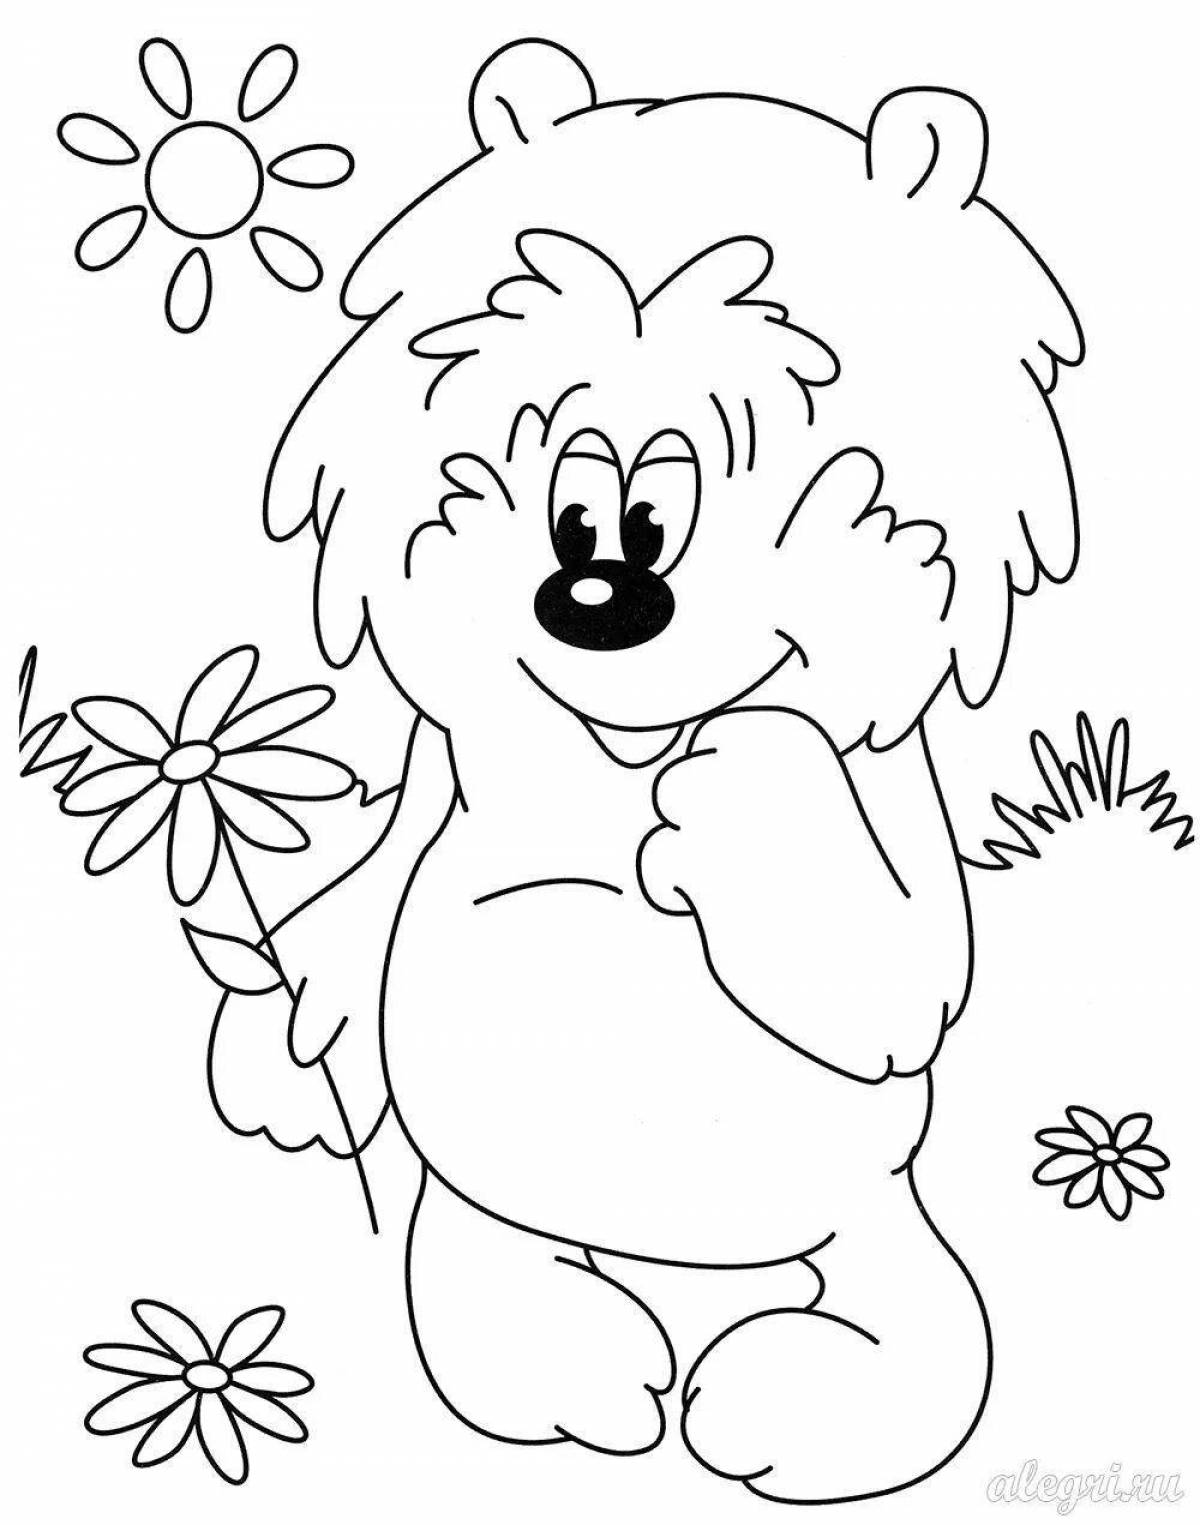 Cute teddy bear coloring book for 5-6 year olds